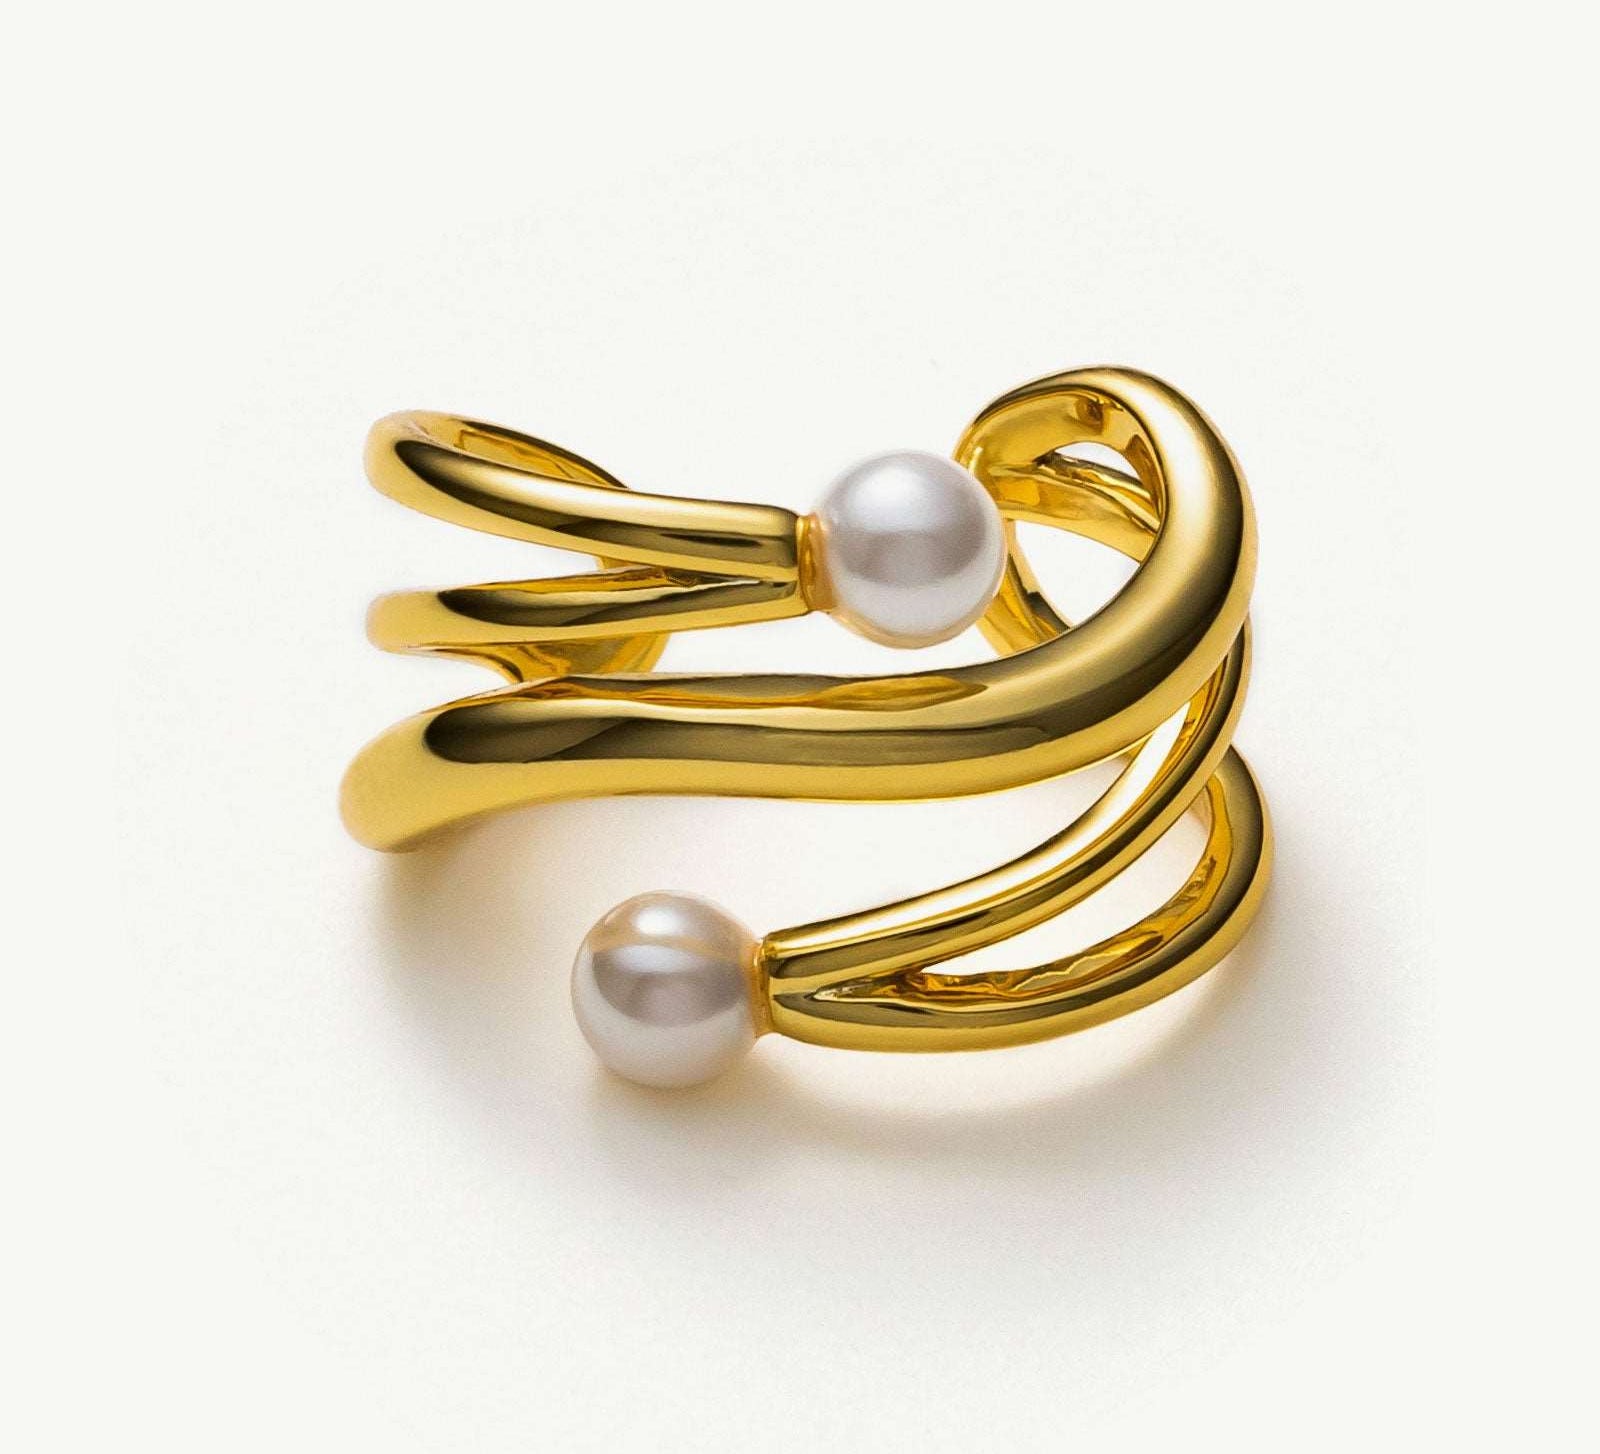 Gold Claw Pearl Ear Cuff, a luxurious and opulent accessory that adds a touch of regal charm to your ear